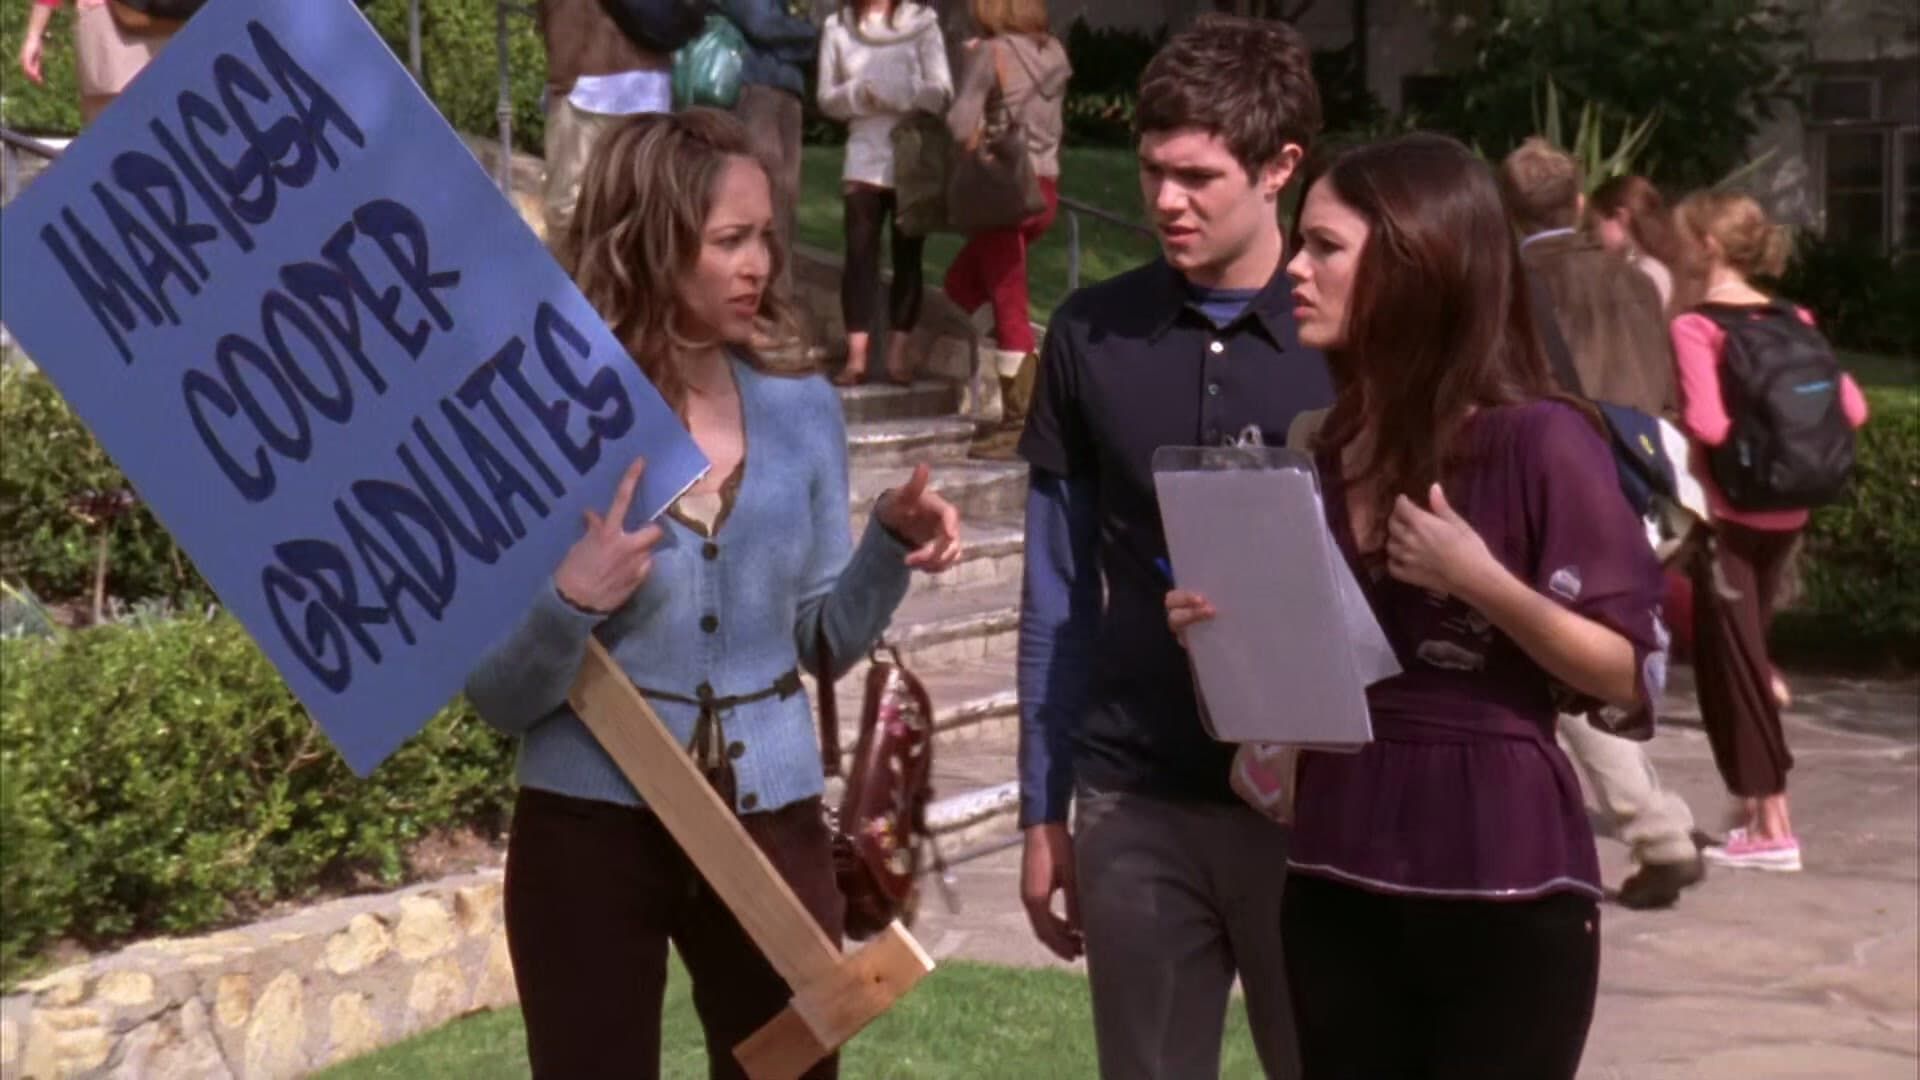 The O.C. background